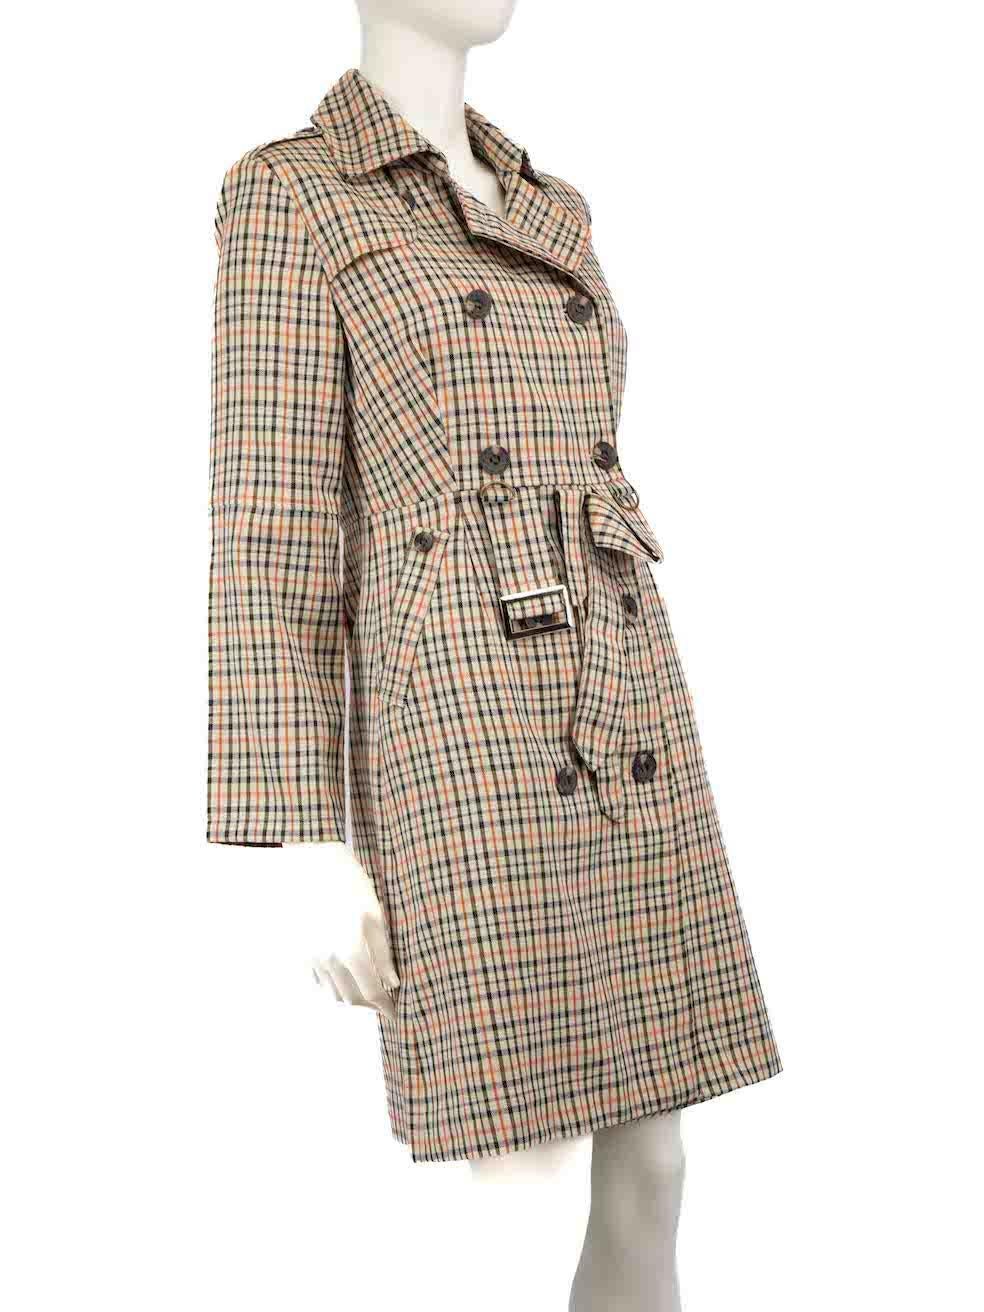 CONDITION is Good. Minor wear to coat is evident. Light wear to the front with some discolouration marks and pulls to the weave to the internal lining on this used Moschino designer resale item.
 
 
 
 Details
 
 
 Brown
 
 Cotton
 
 Trench coat
 
